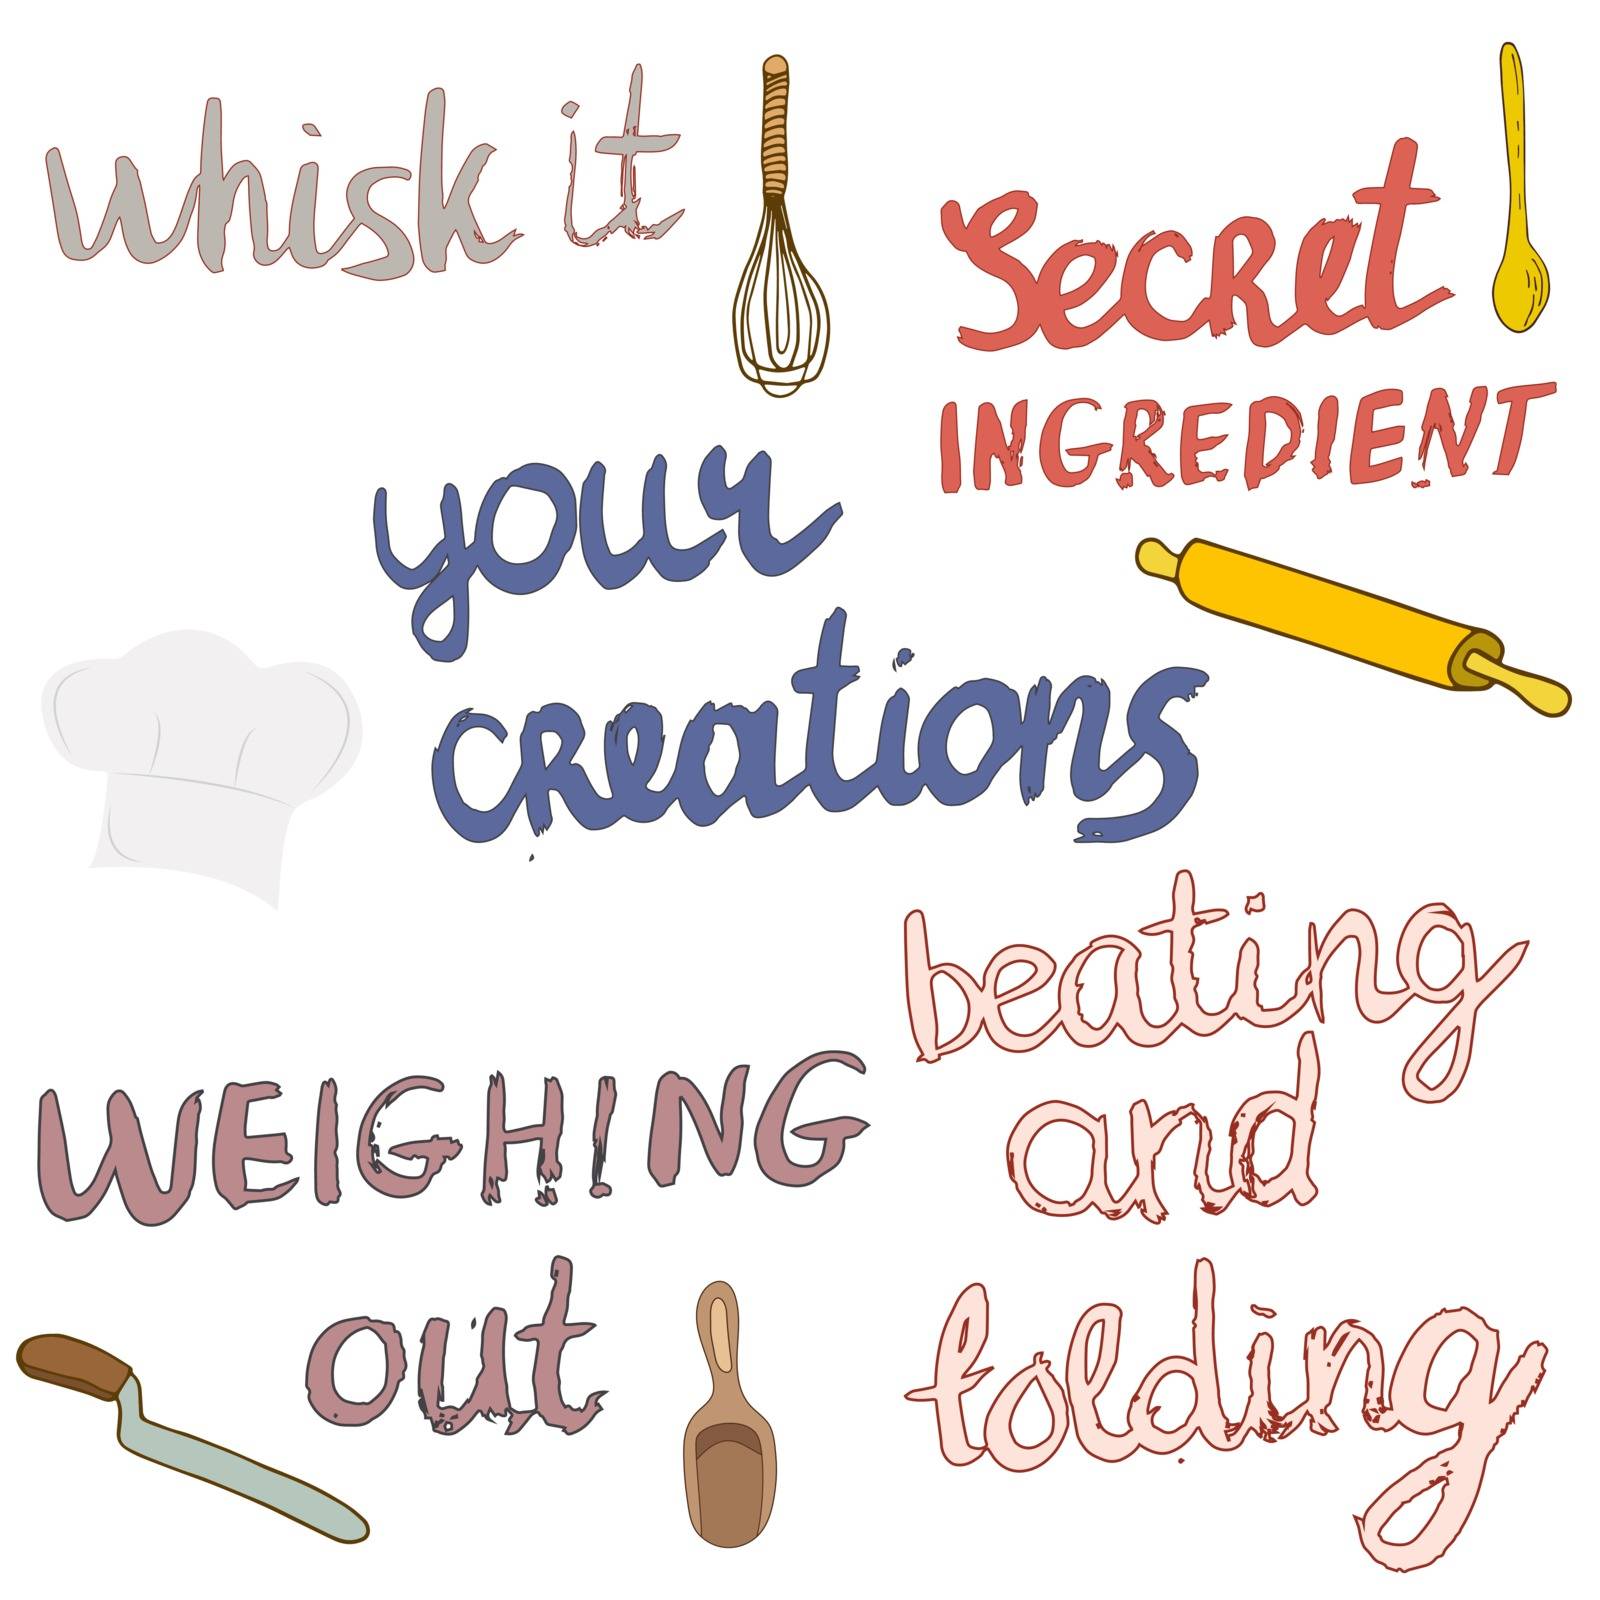 Hand lettering whisk it, secret ingredient, your creations, weighing out, beating and folding. Illustration of whisk, chef hat, rolling pin and spoon.